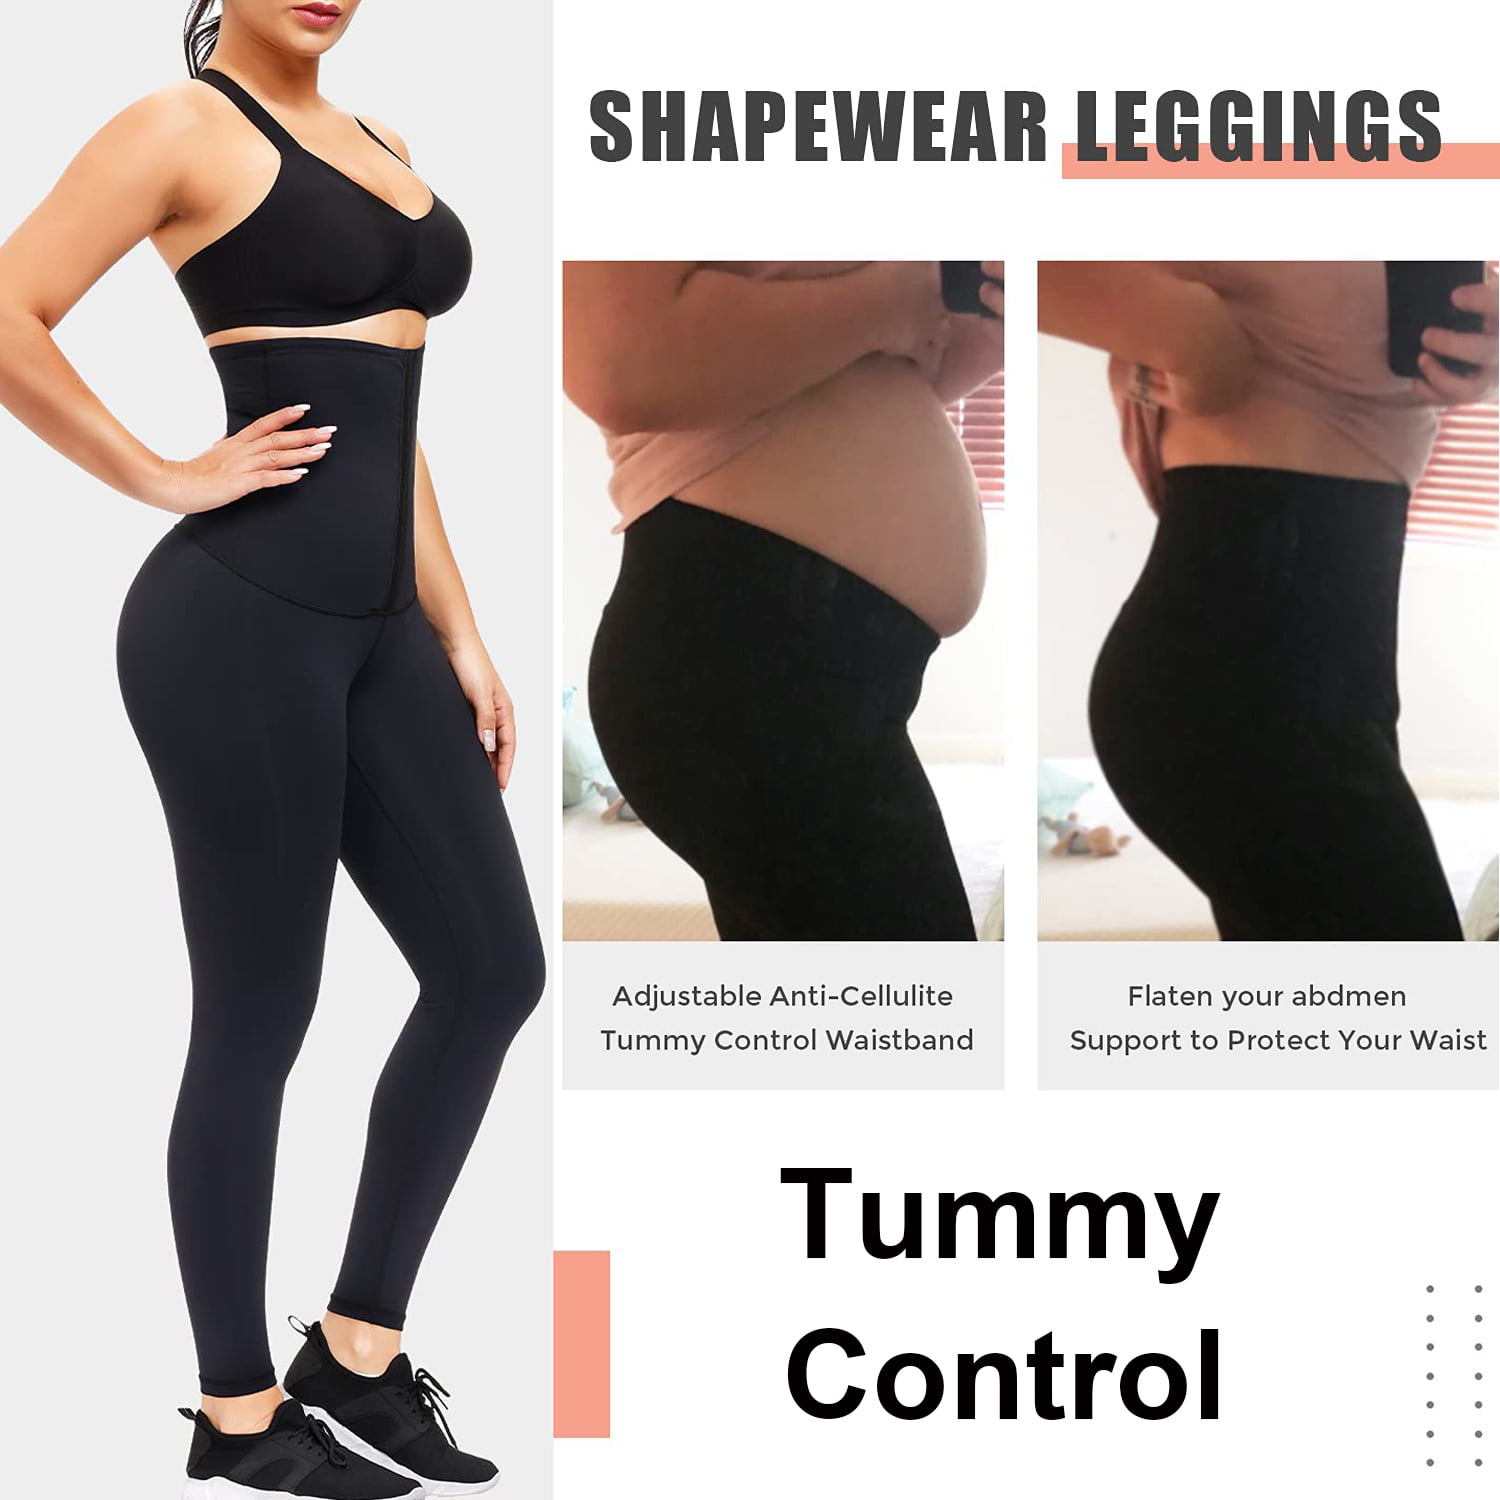 Buy Next Active Sports Tummy Control High Waisted Full Length Sculpting  Leggings from the Laura Ashley online shop